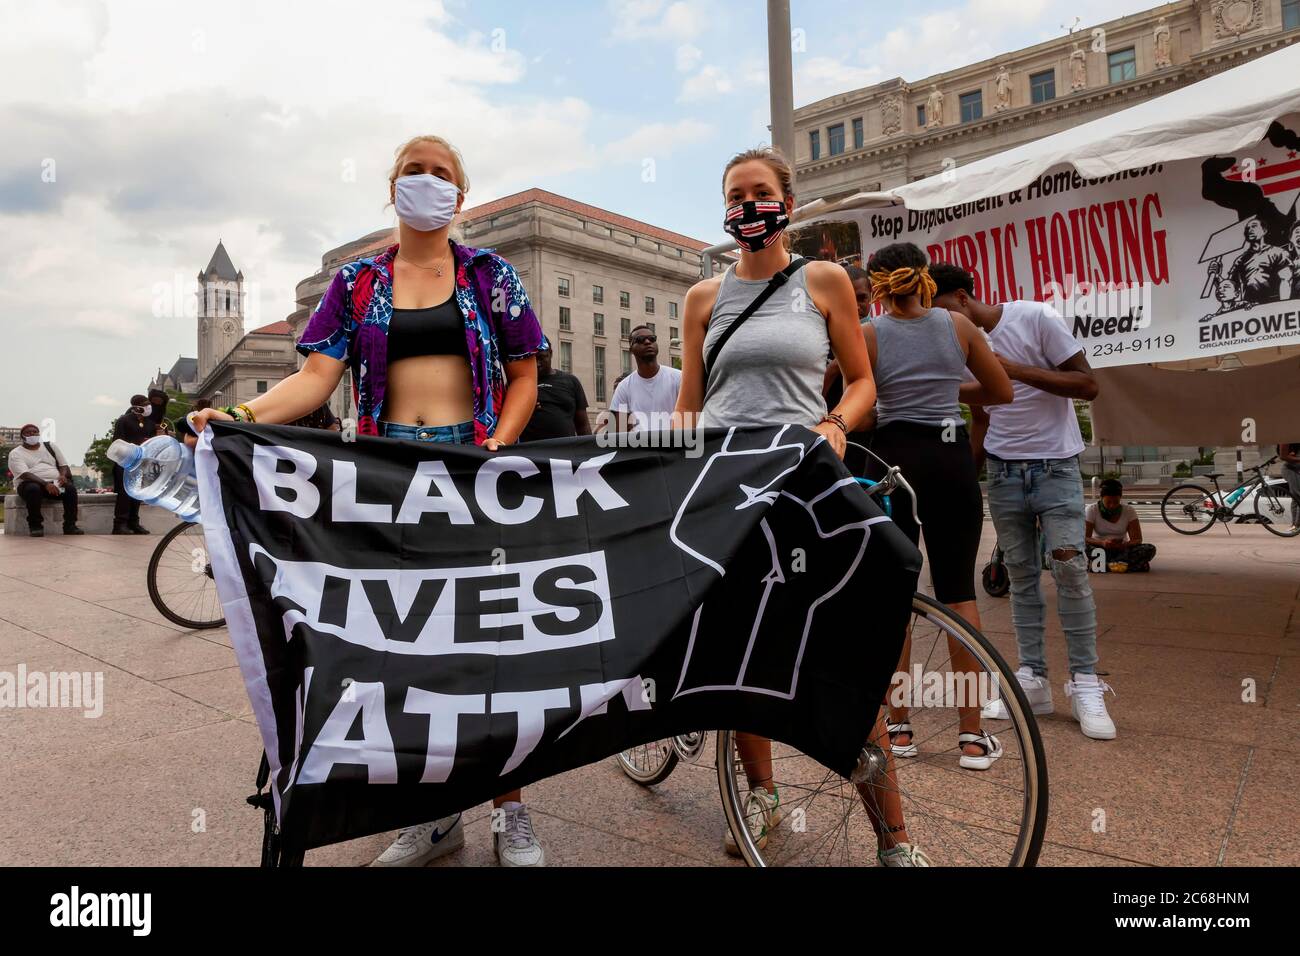 Two protesters hold large Black Lives Matter flag at Black Homes Matter rally at Freedom Plaza, Trump Hotel in distance, Washington, DC, United States Stock Photo